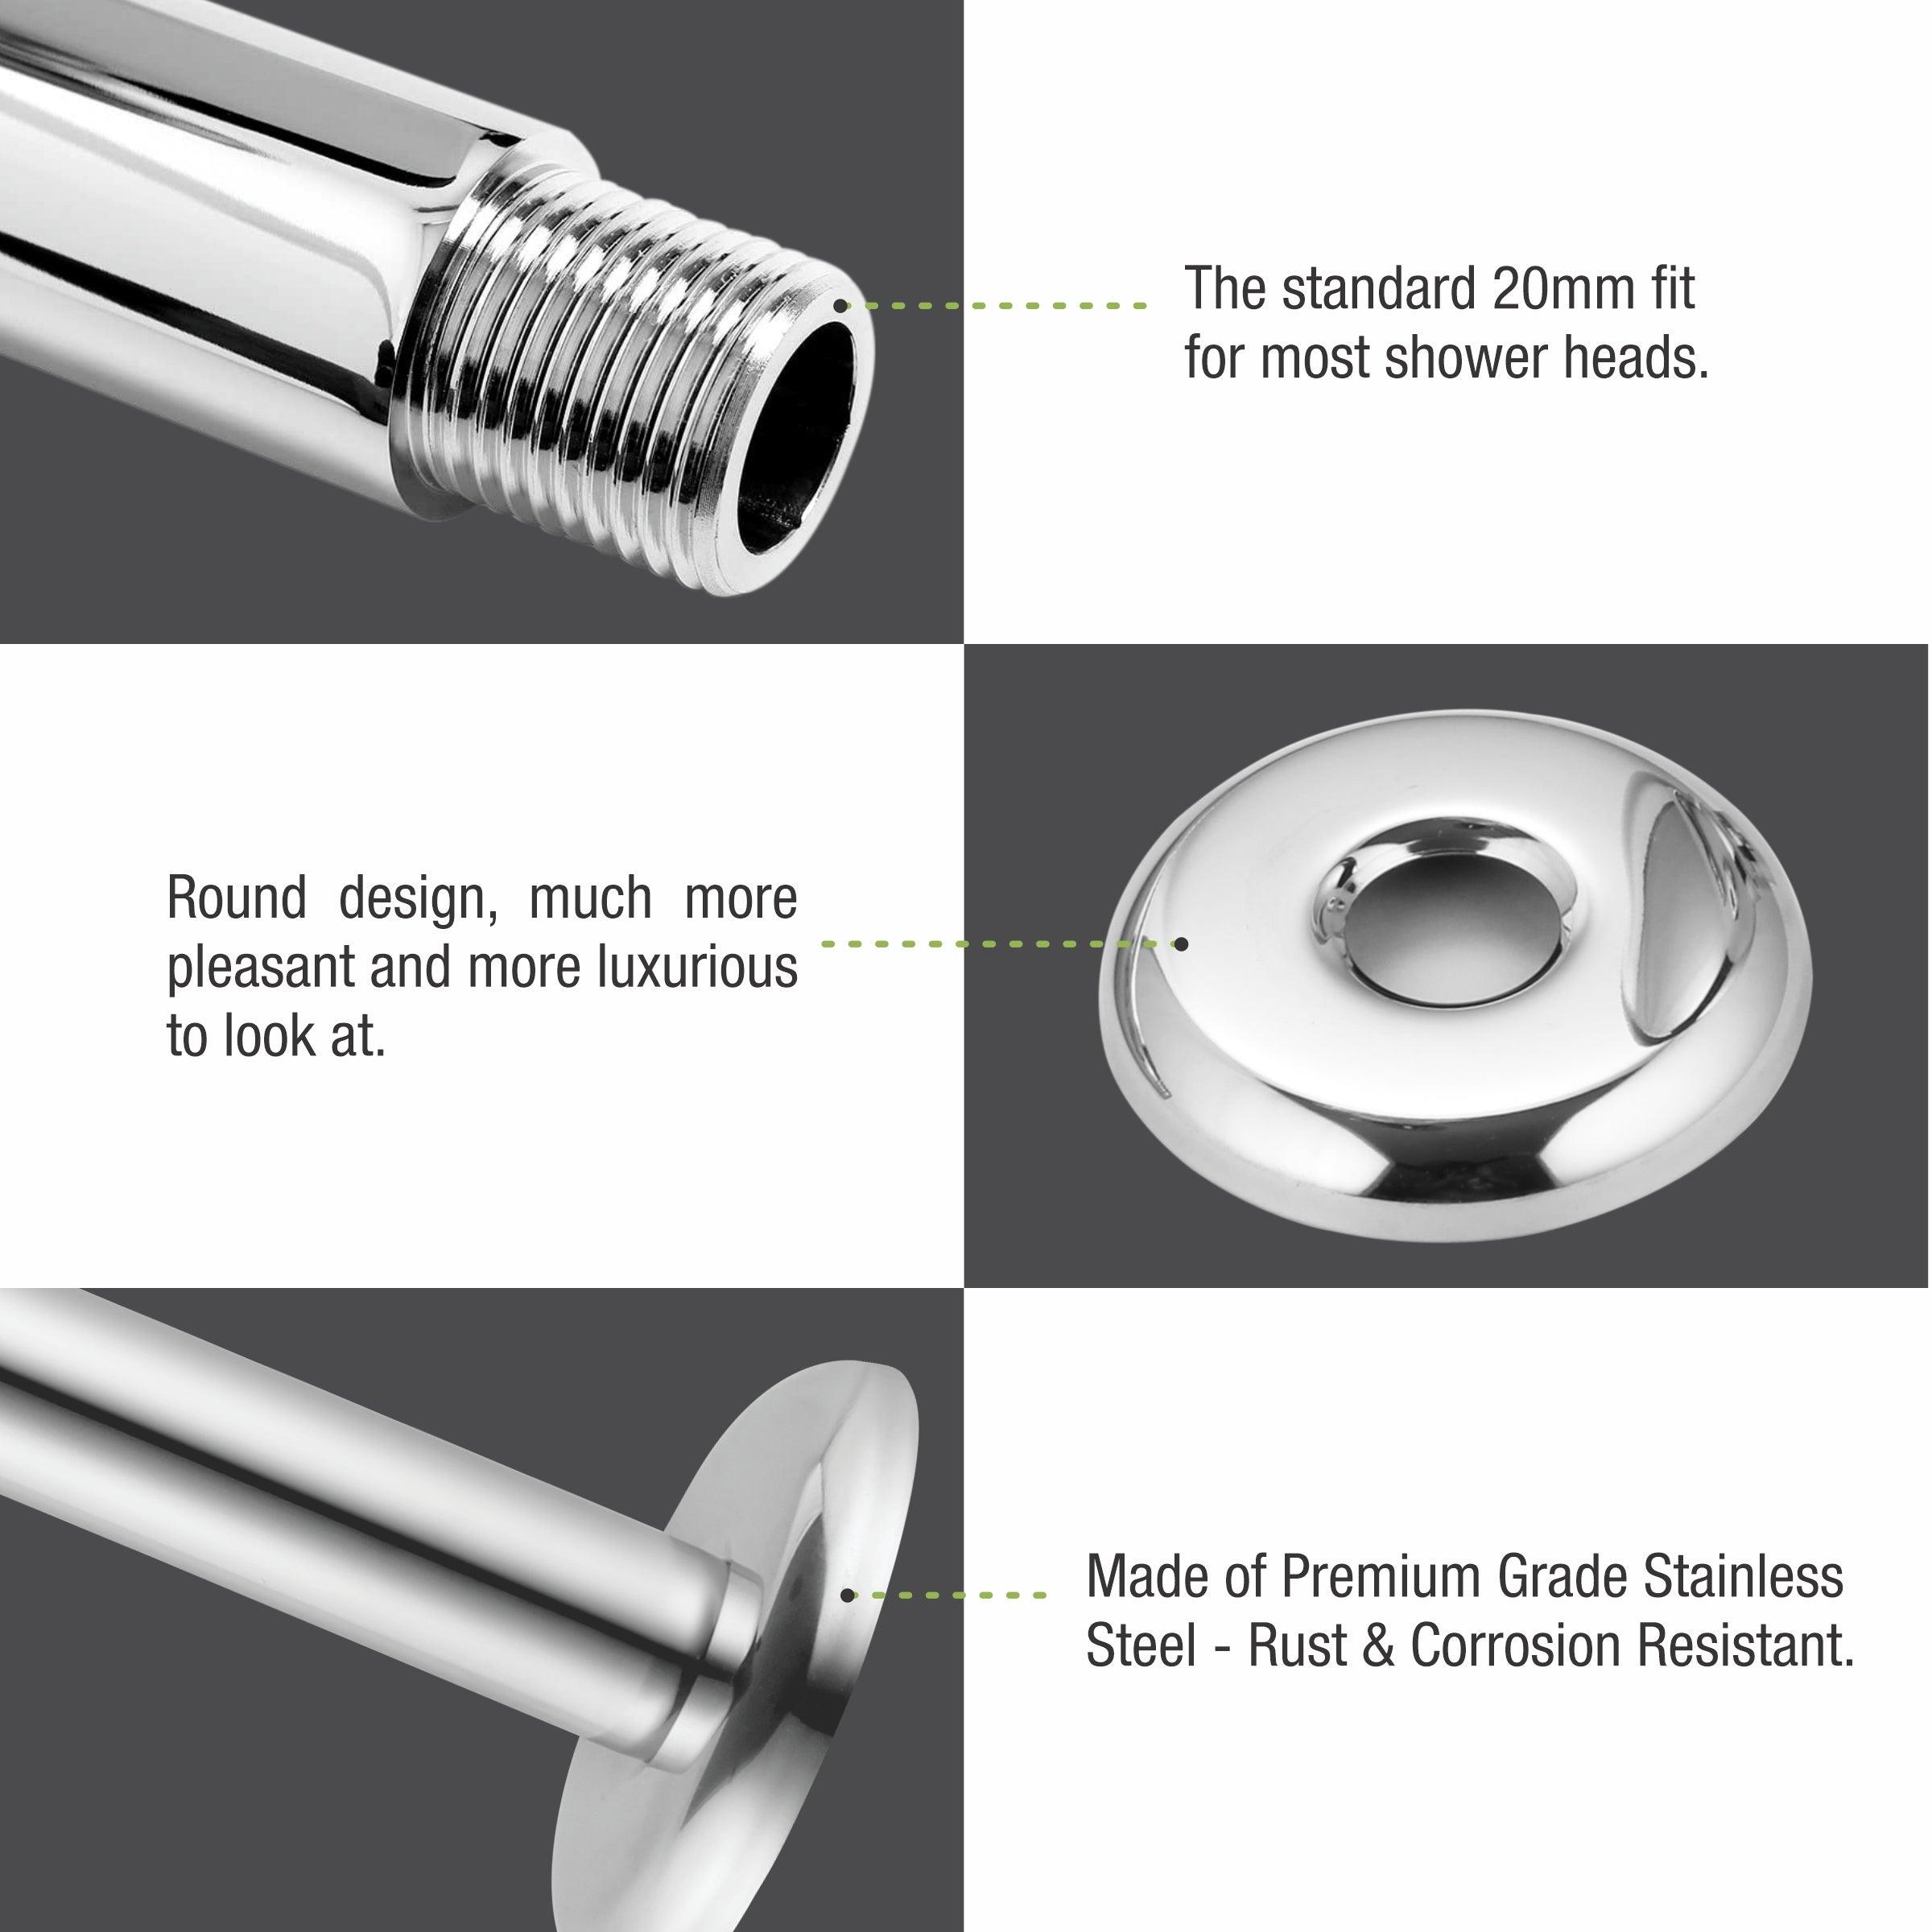 Ceiling Round Shower Arm (12 Inches) features